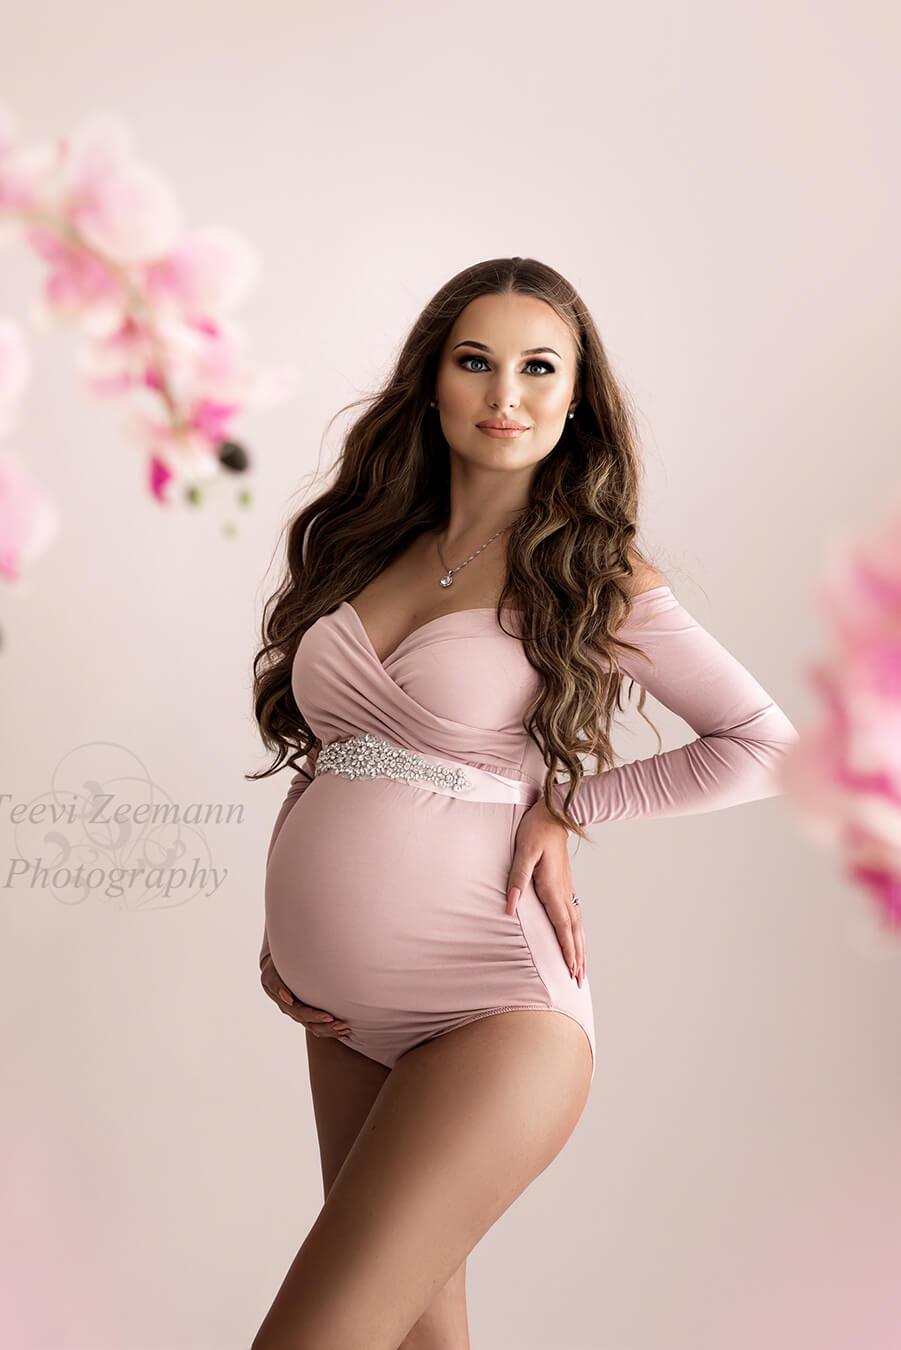 A pregnant woman is wearing a pink bodysuit. The bodysuit is off shoulder and has a sweetheart top. She is wearing a sash right under her breast